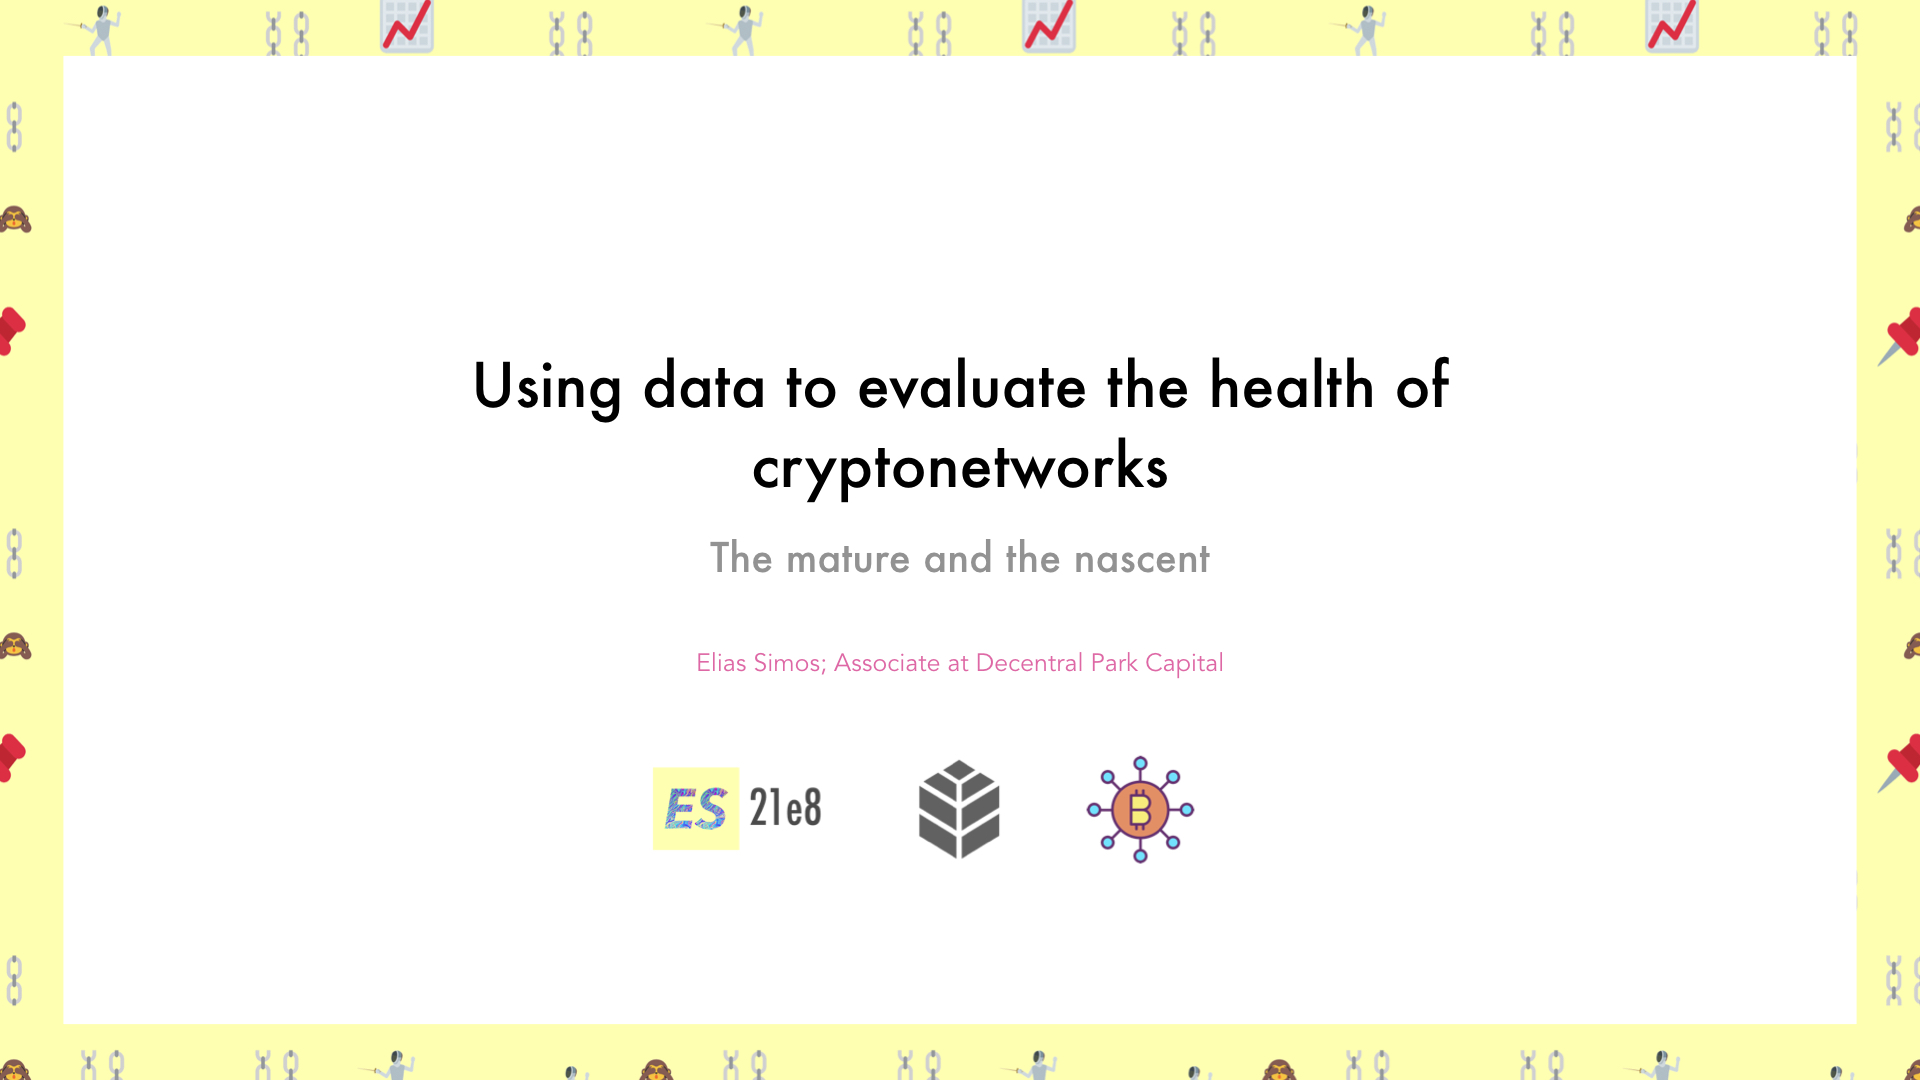 Using data to evaluate the health of cryptonetworks (final).001.jpeg